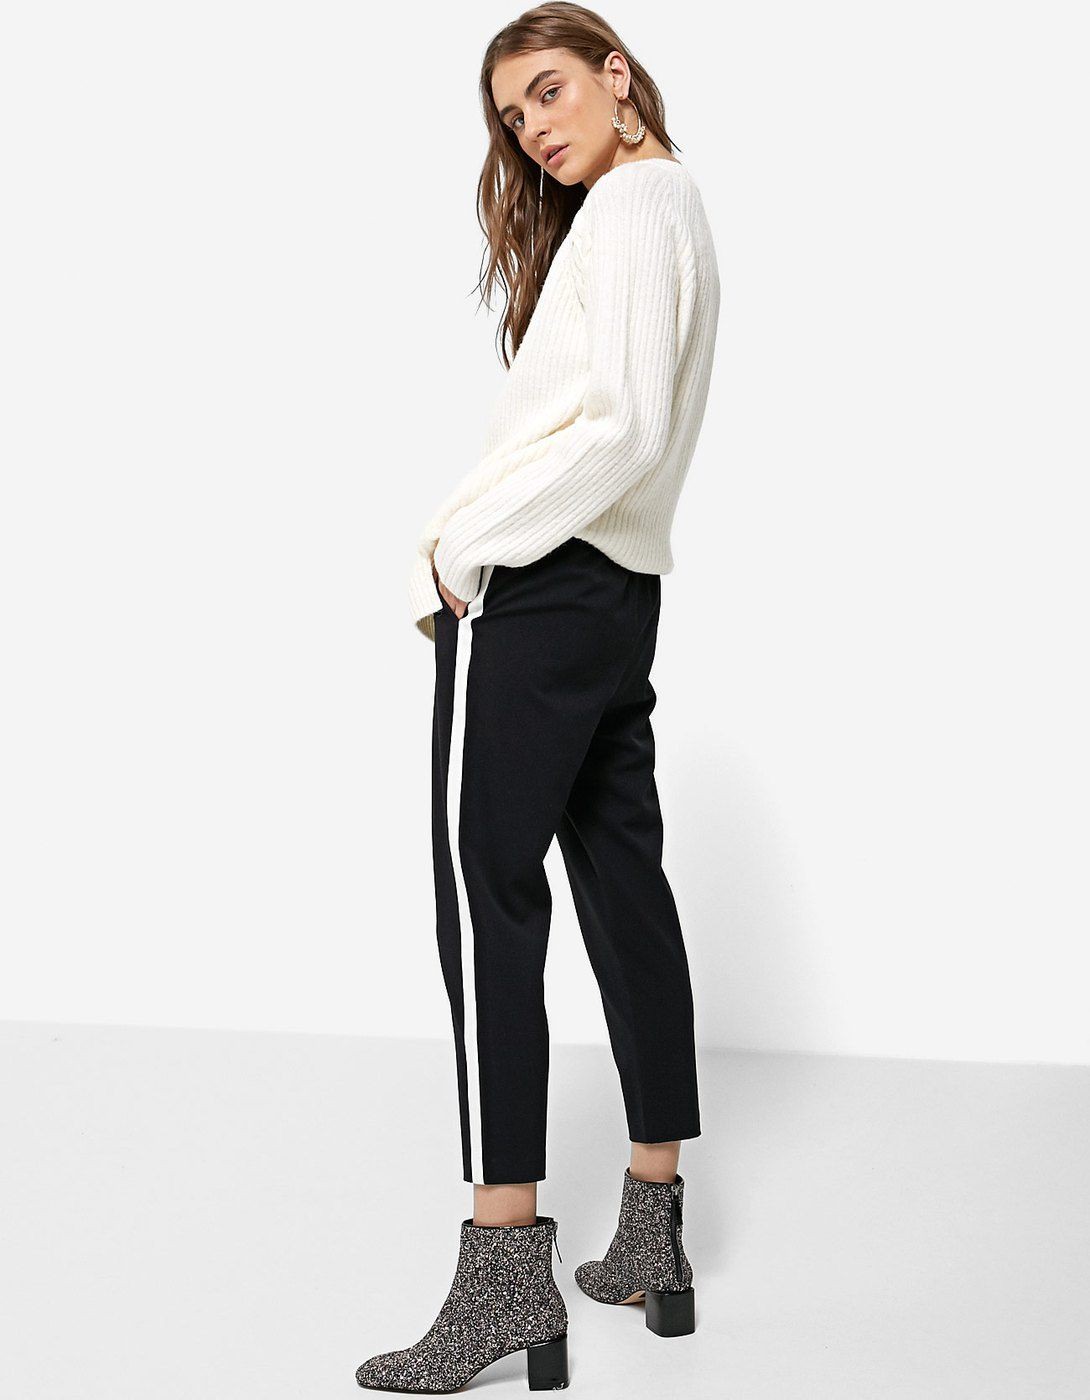 Pantalon negro raya lateral blanca stradivarius | Outfits With Side Stripe Trousers For Girls | Ã Trouser Outfits,